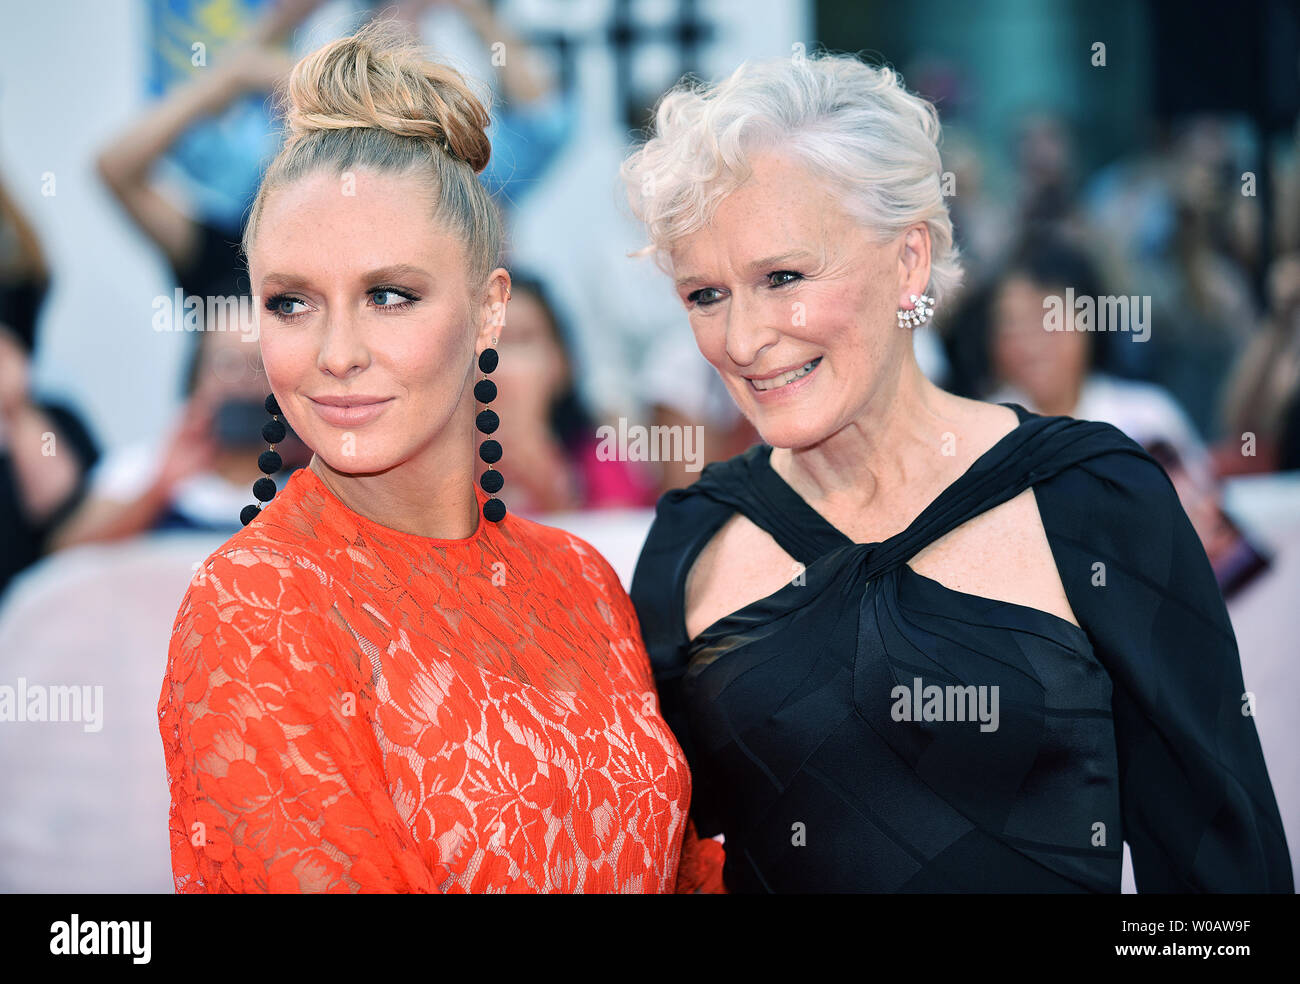 Glenn Close (R) and her daughter Annie Starke attend the world premiere of 'The Wife' at Roy Thomson Hall during the Toronto International Film Festival in Toronto, Canada on September 14, 2017. Photo by Christine Chew/UPI Stock Photo